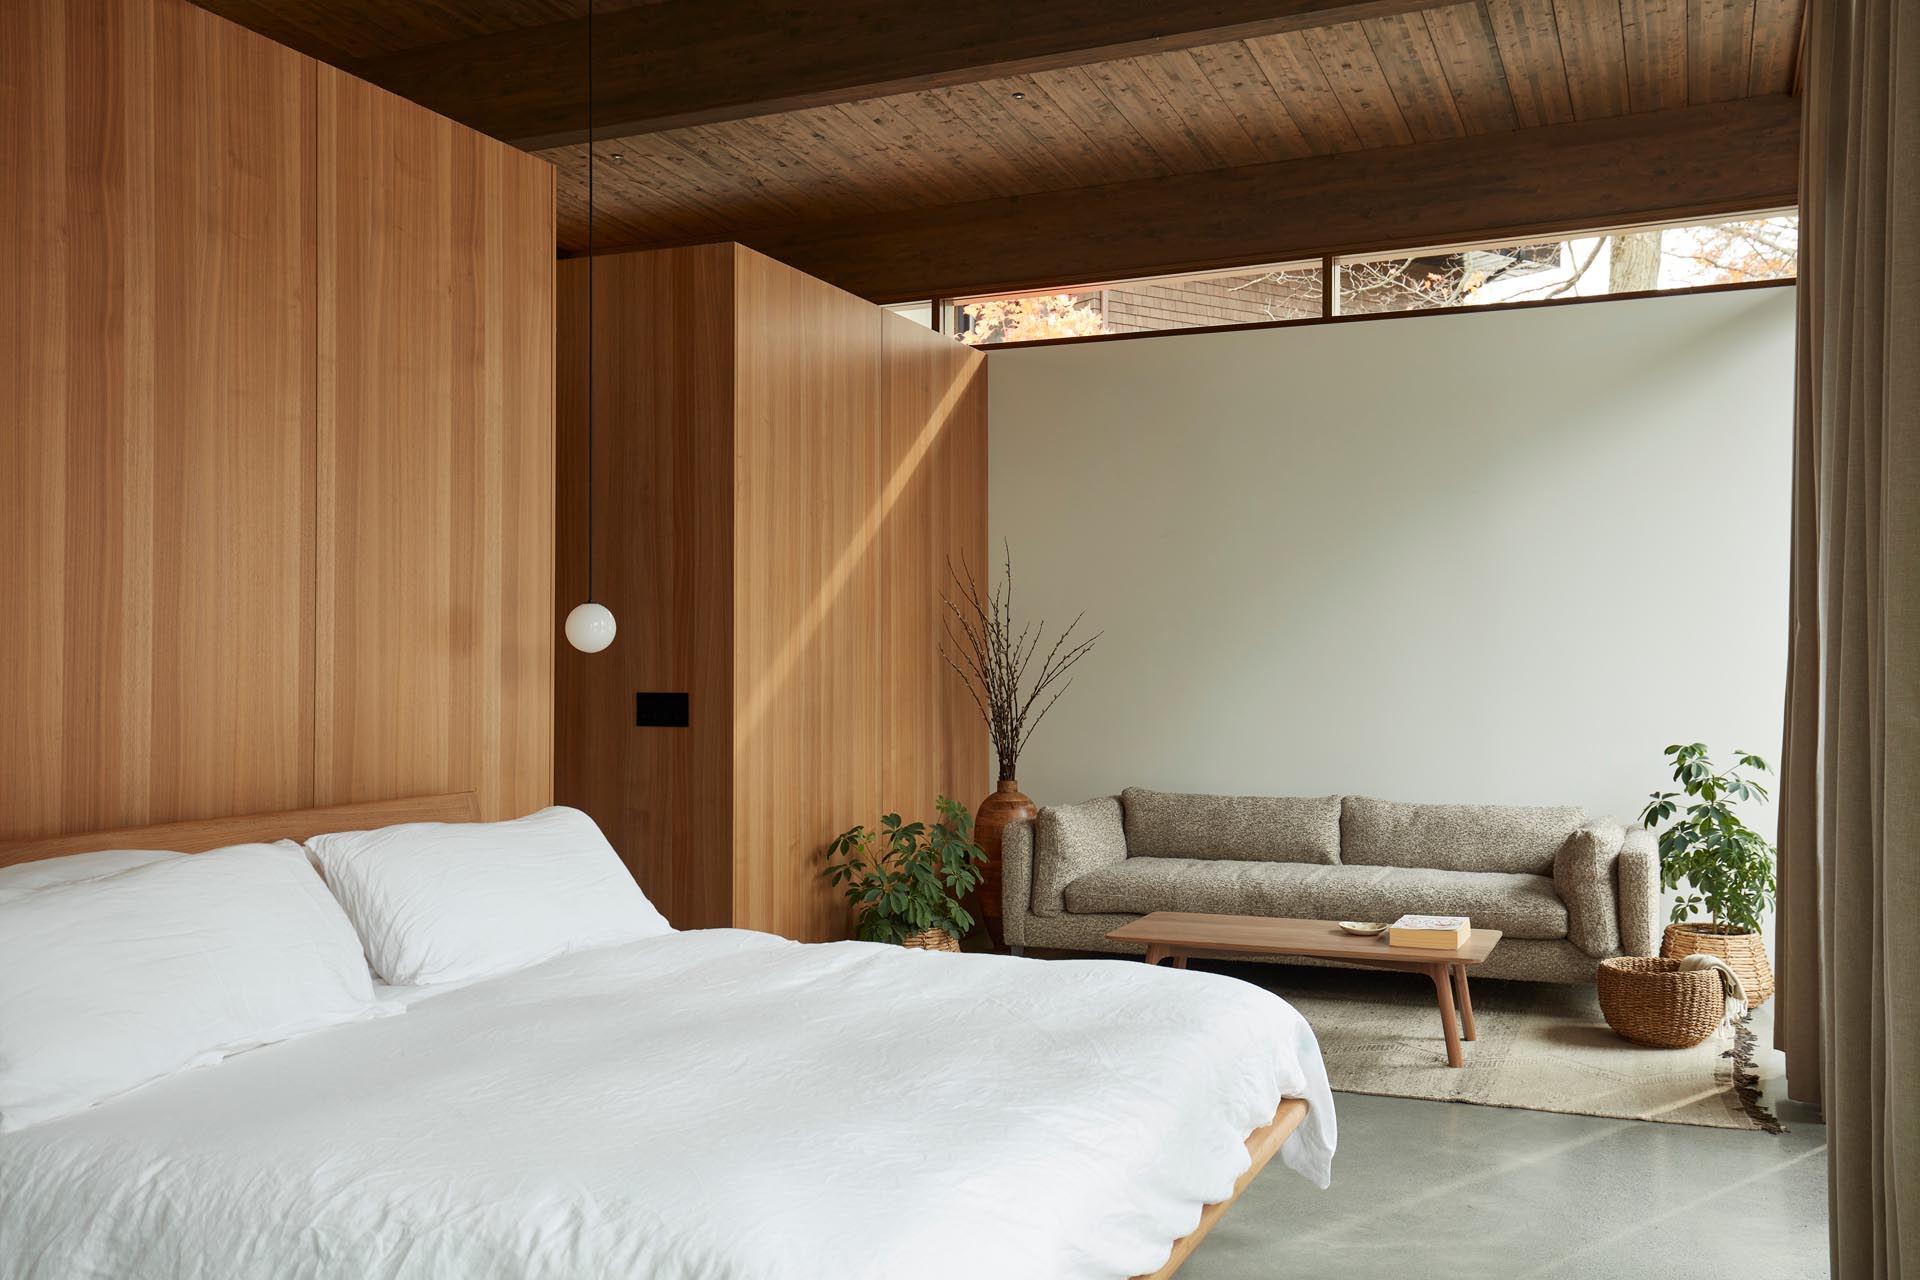 In this modern bedroom, custom wood closets serve as the backdrop for the bed.